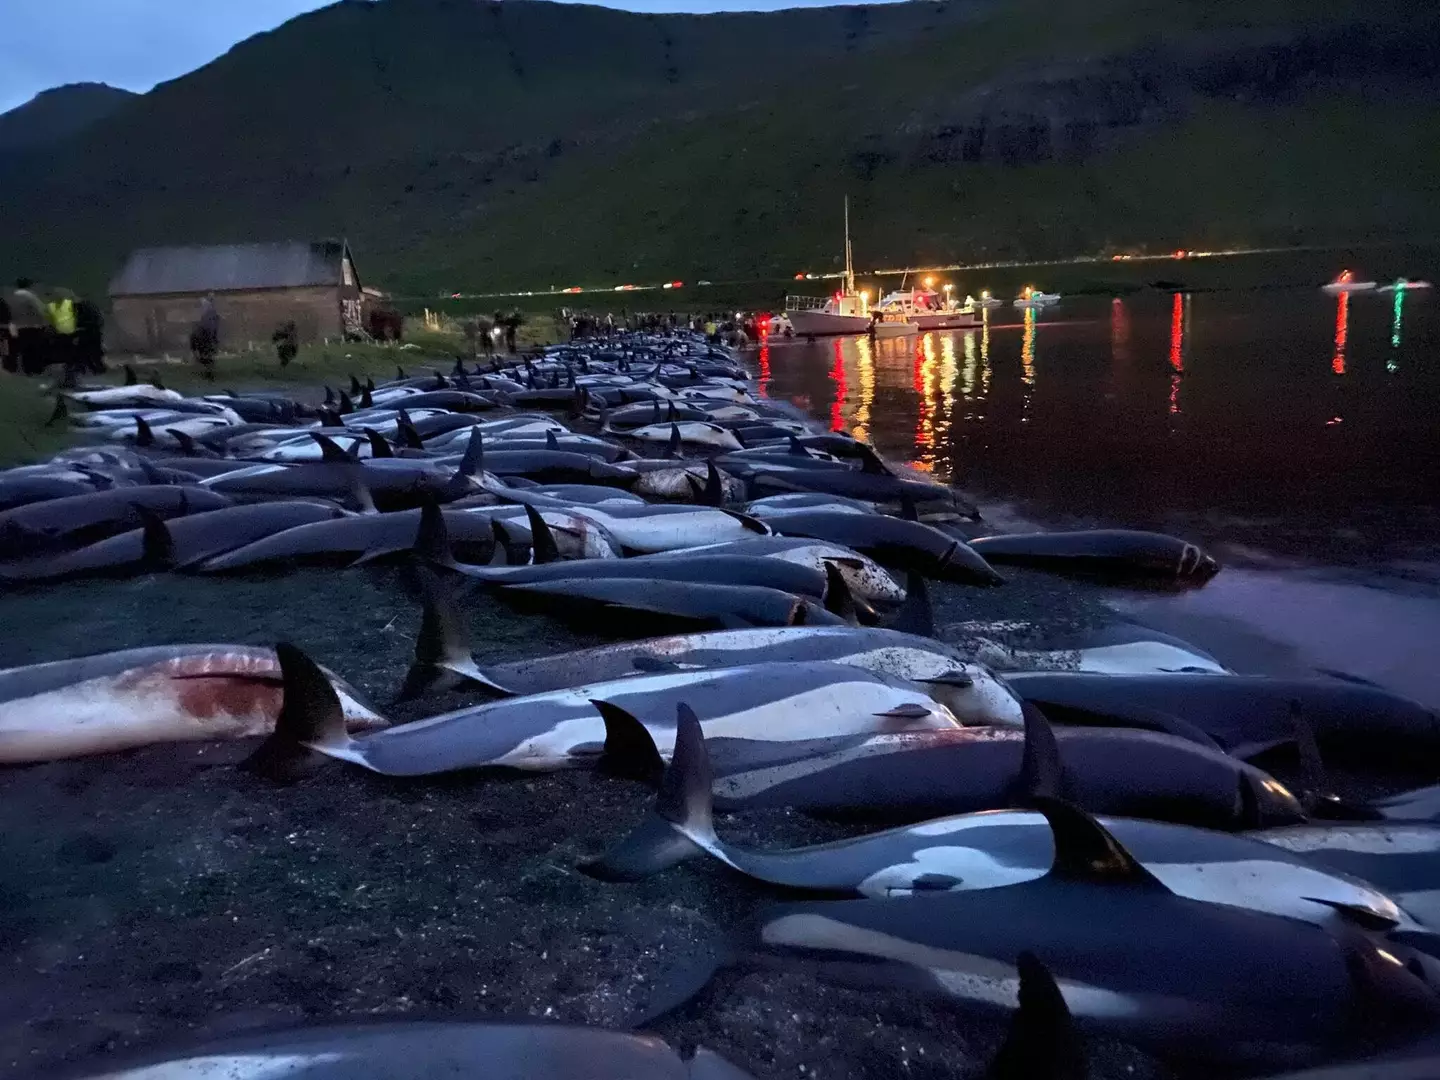 Over 1,400 dolphins were killed in one day.